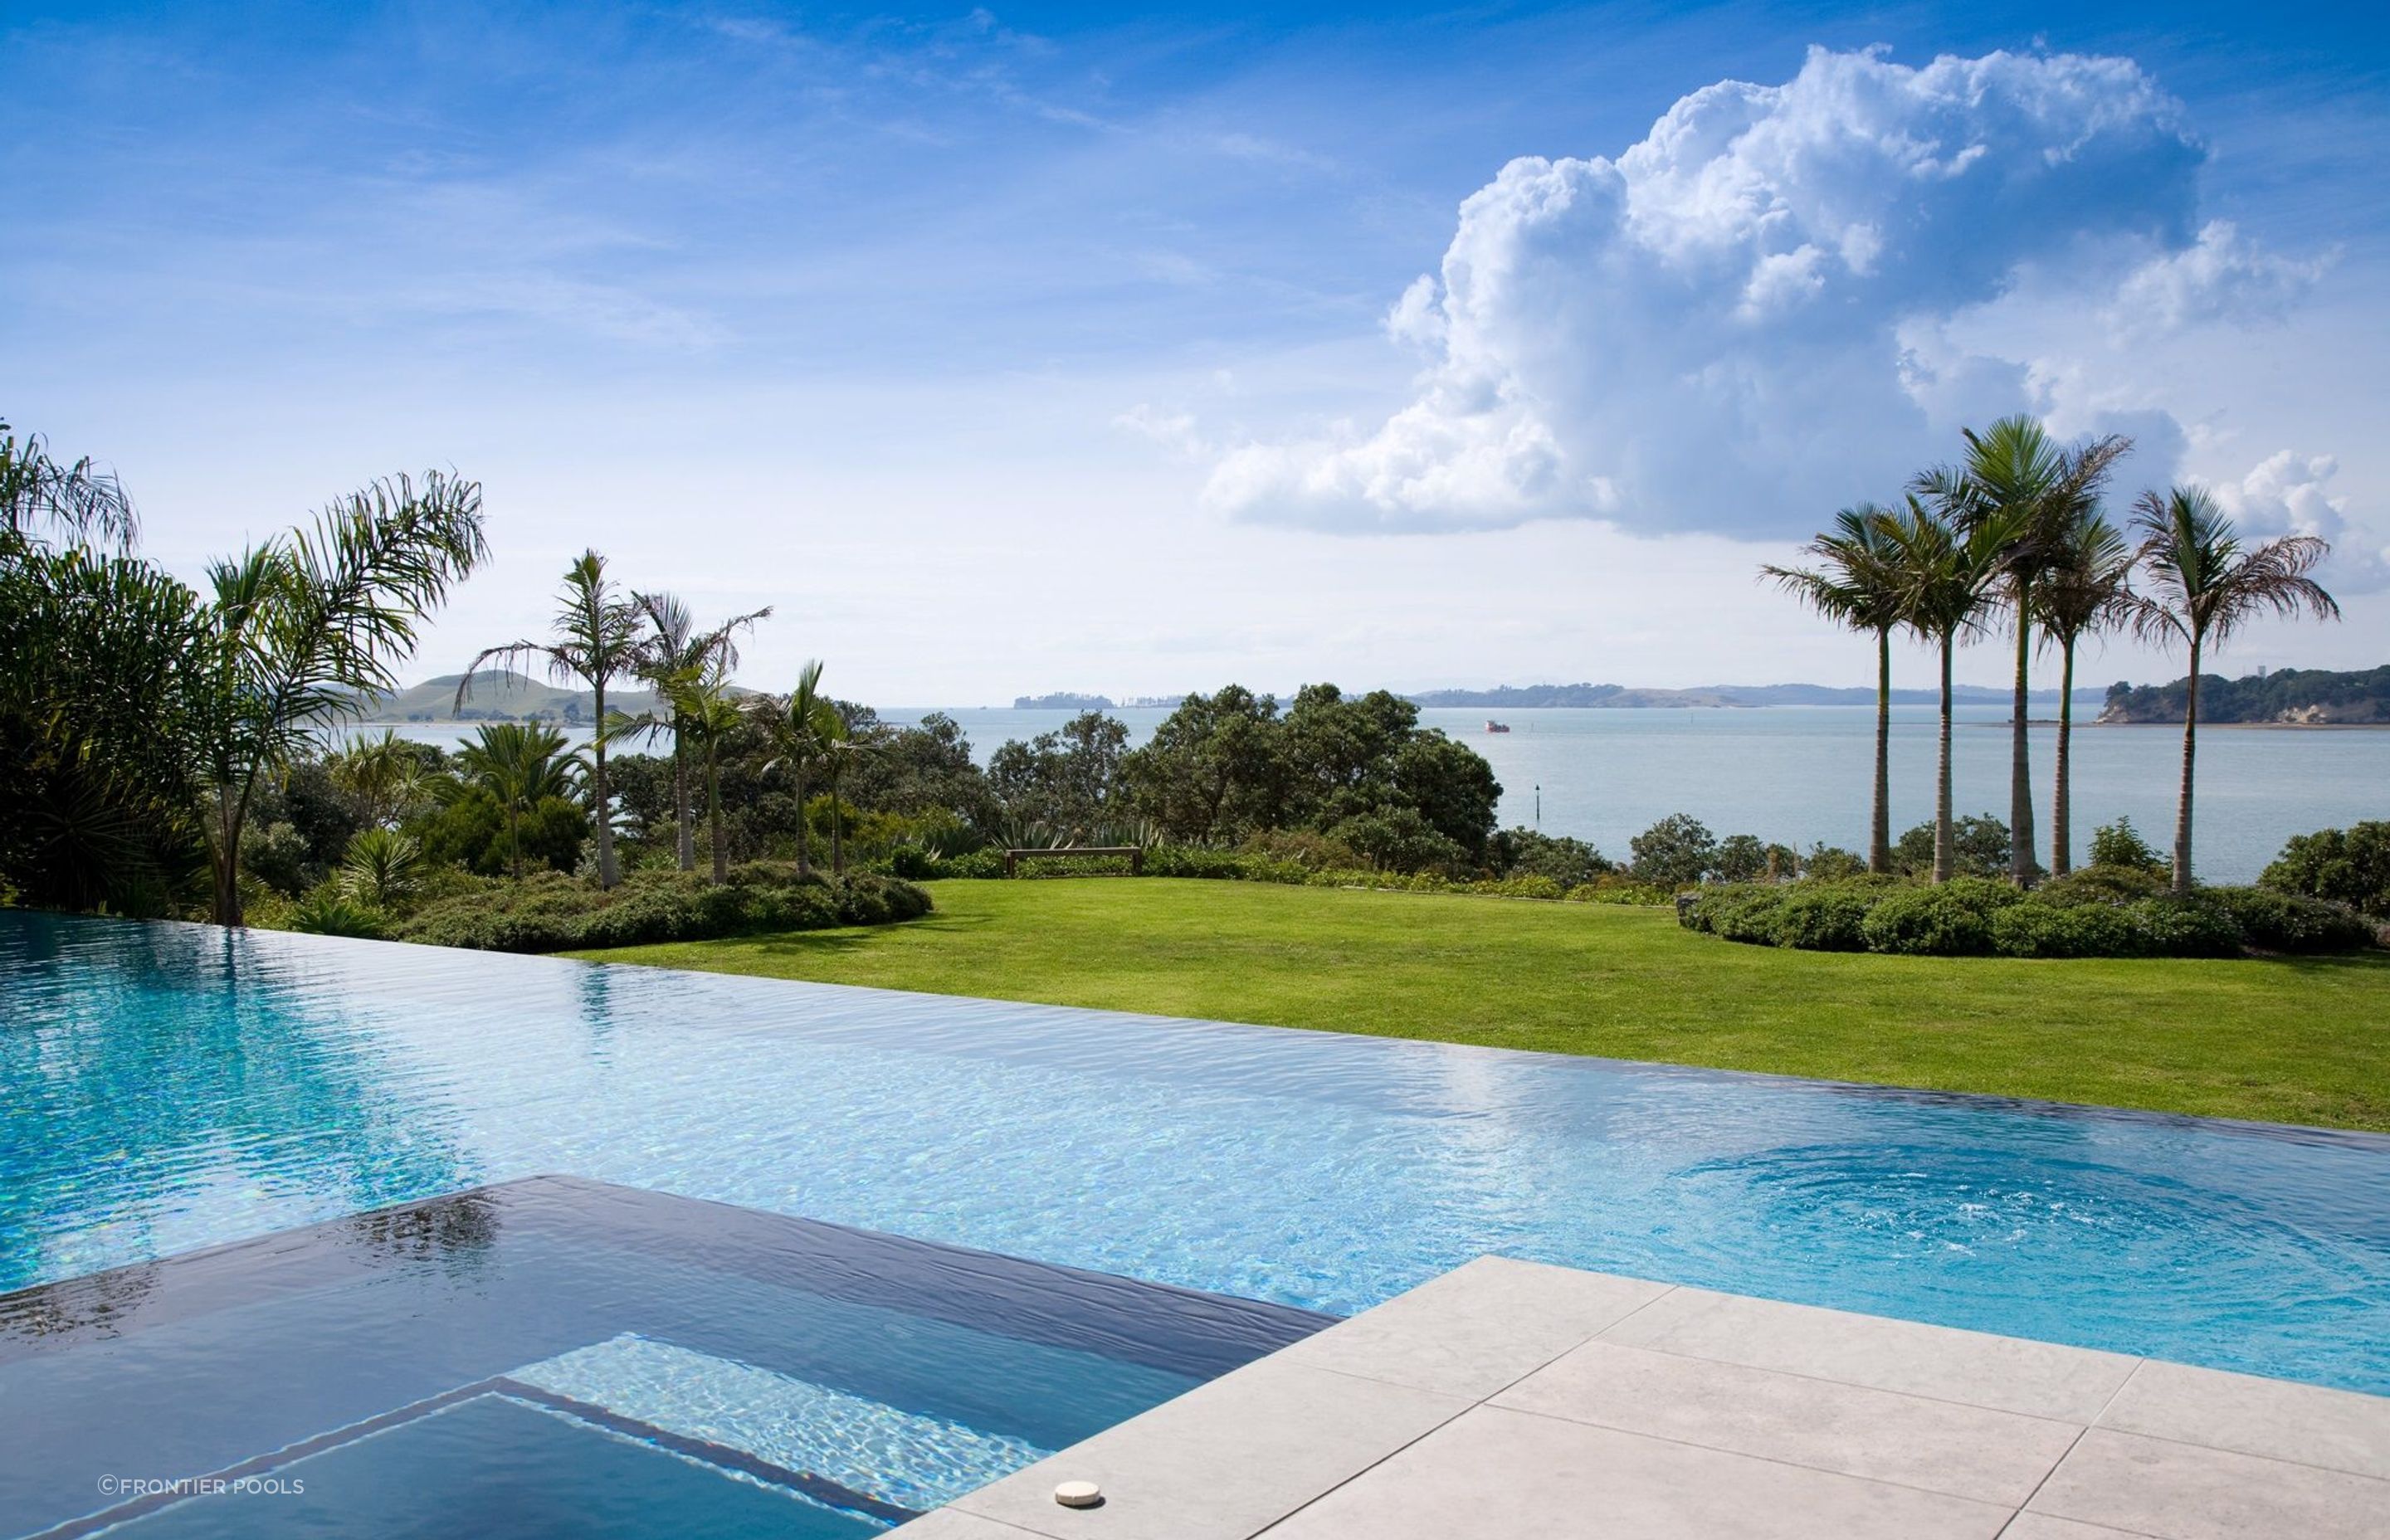 This Vanishing Edge Pool by Frontier Pools make the most of an exquisite view.